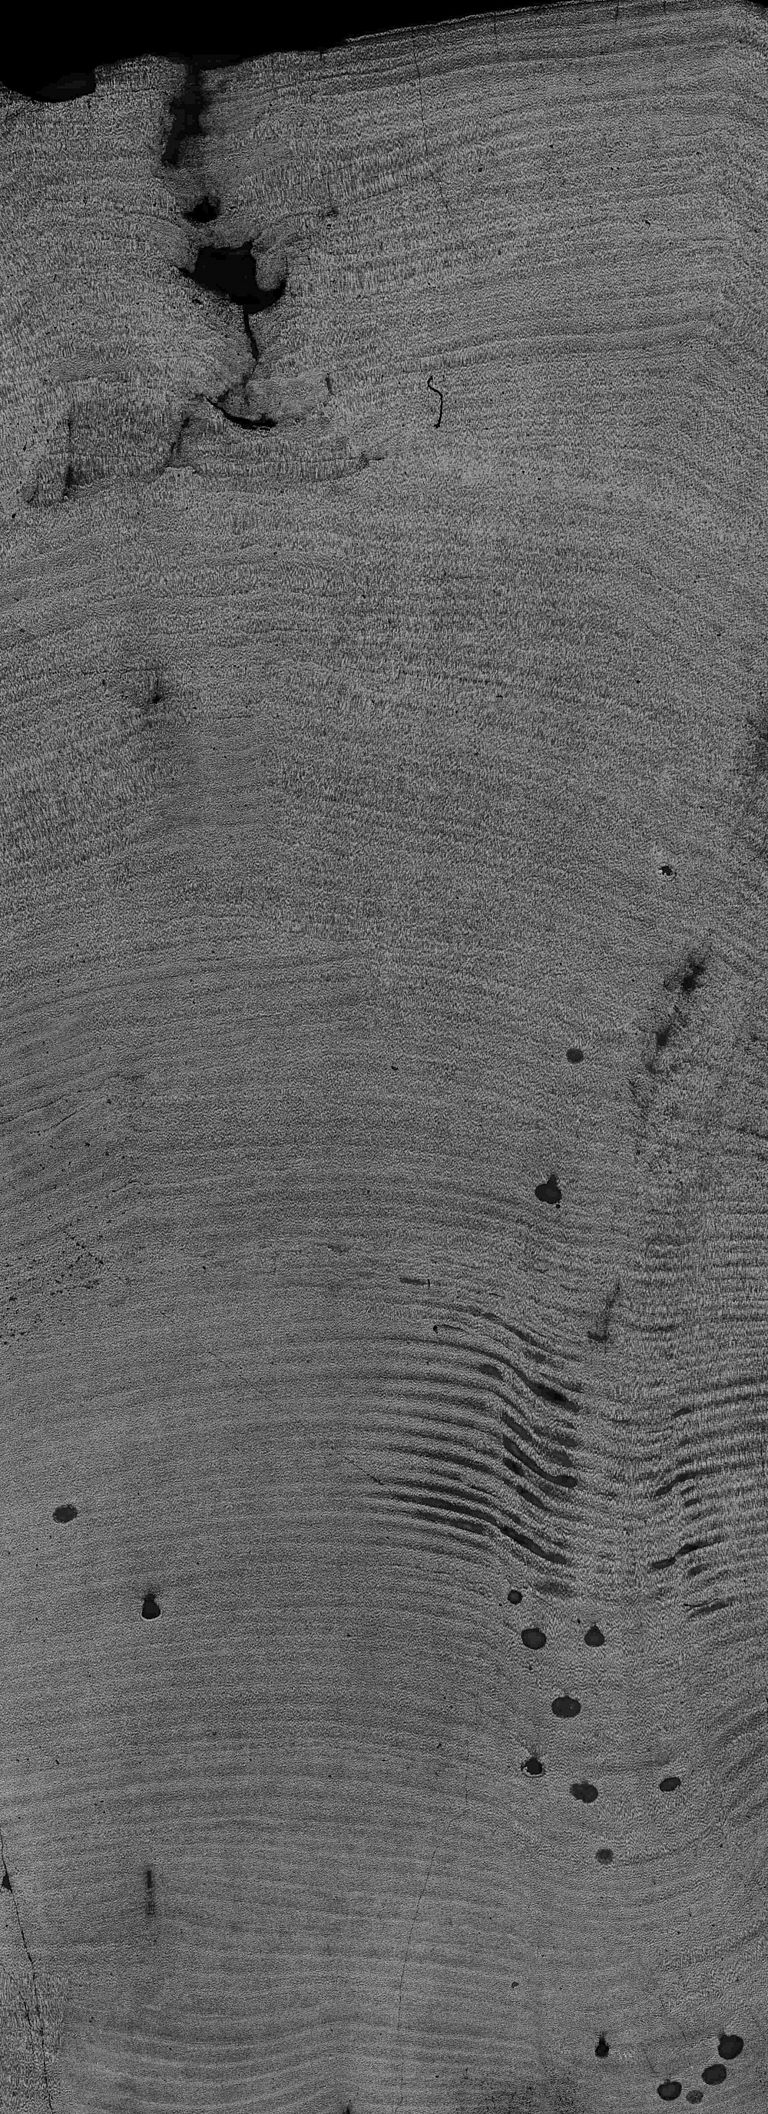 A section through the red alga Clathromorphum shows annual growth bands, similar to annual tree rings. The image shows 150 years of growth, and the scale from top to bottom is about 2.5 centimeters. Photo: Jochen Halfar